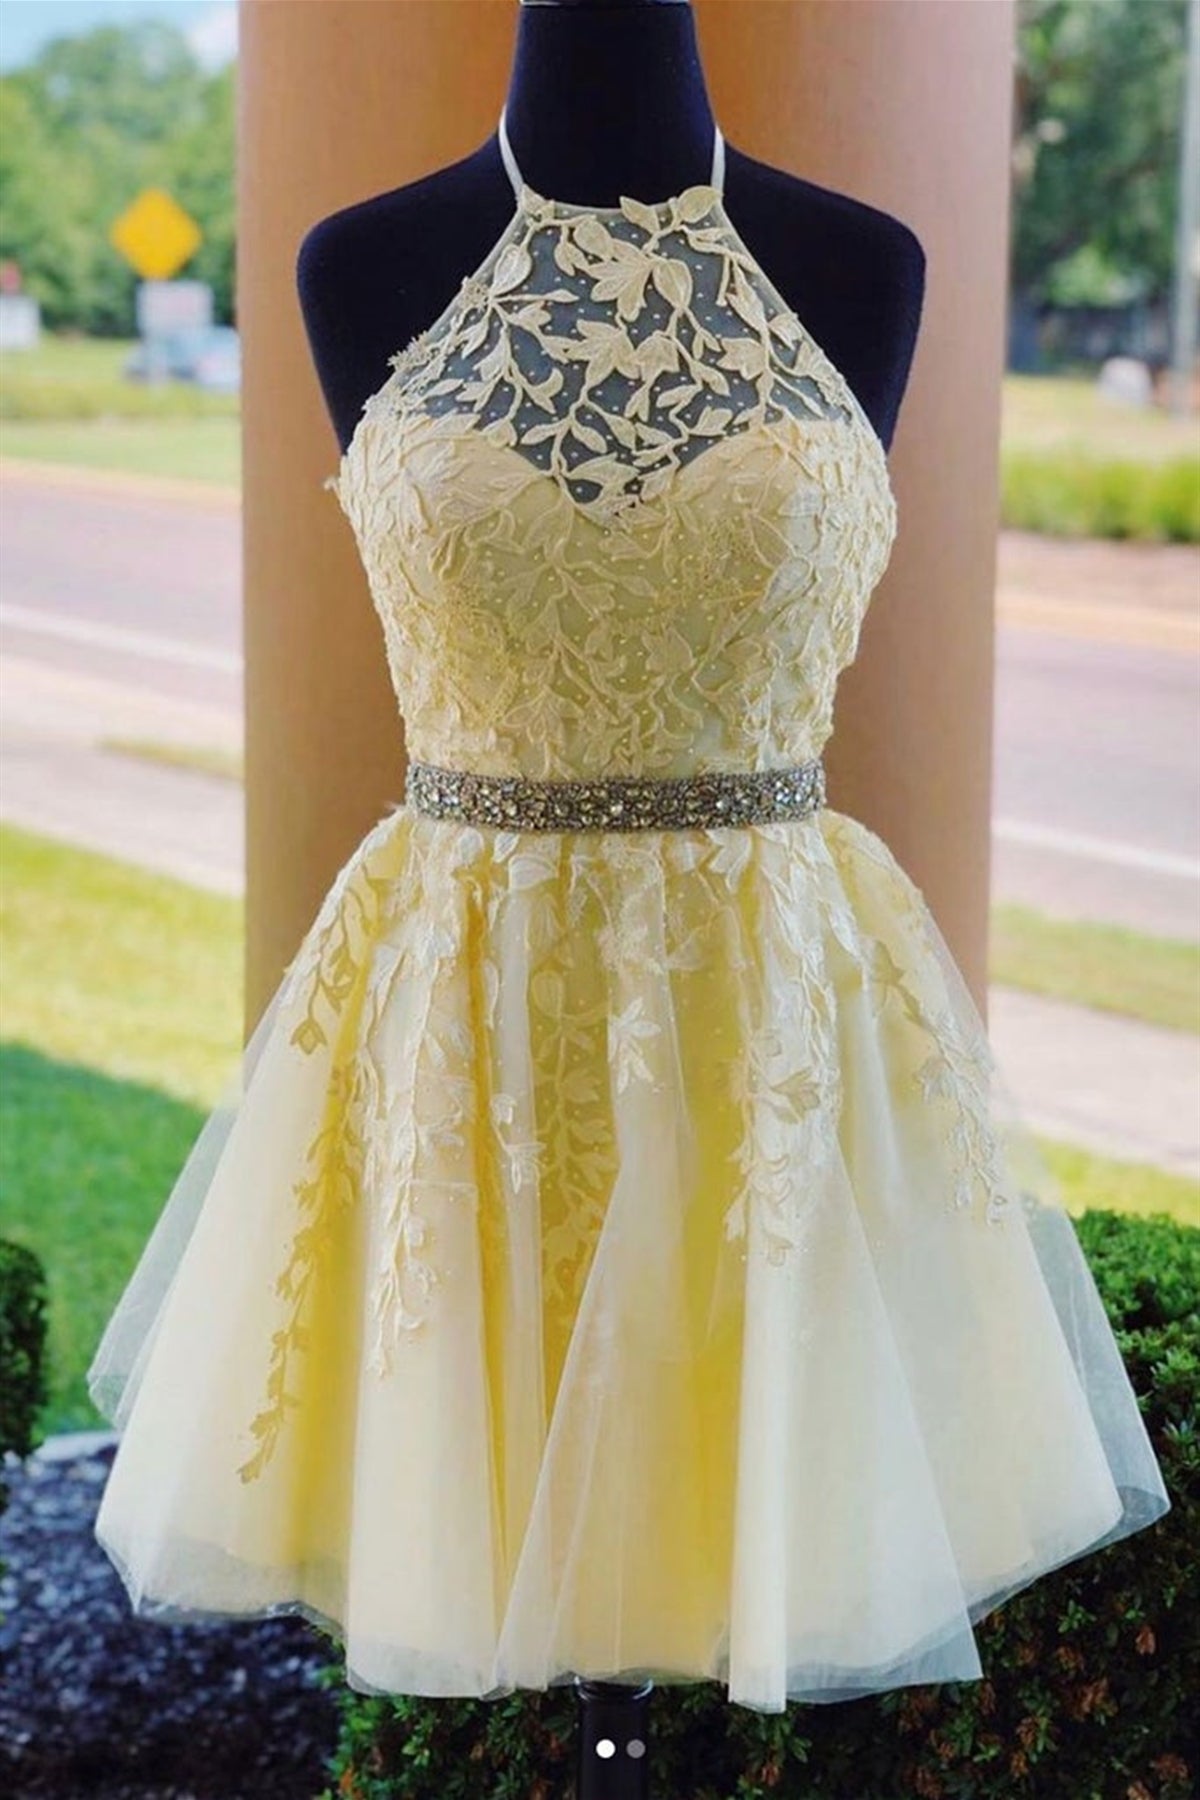 Halter Neck Backless Yellow Tulle Short Lace Prom Dresses, Yellow Lace Homecoming Dresses, Backless Yellow Formal Evening Dresses